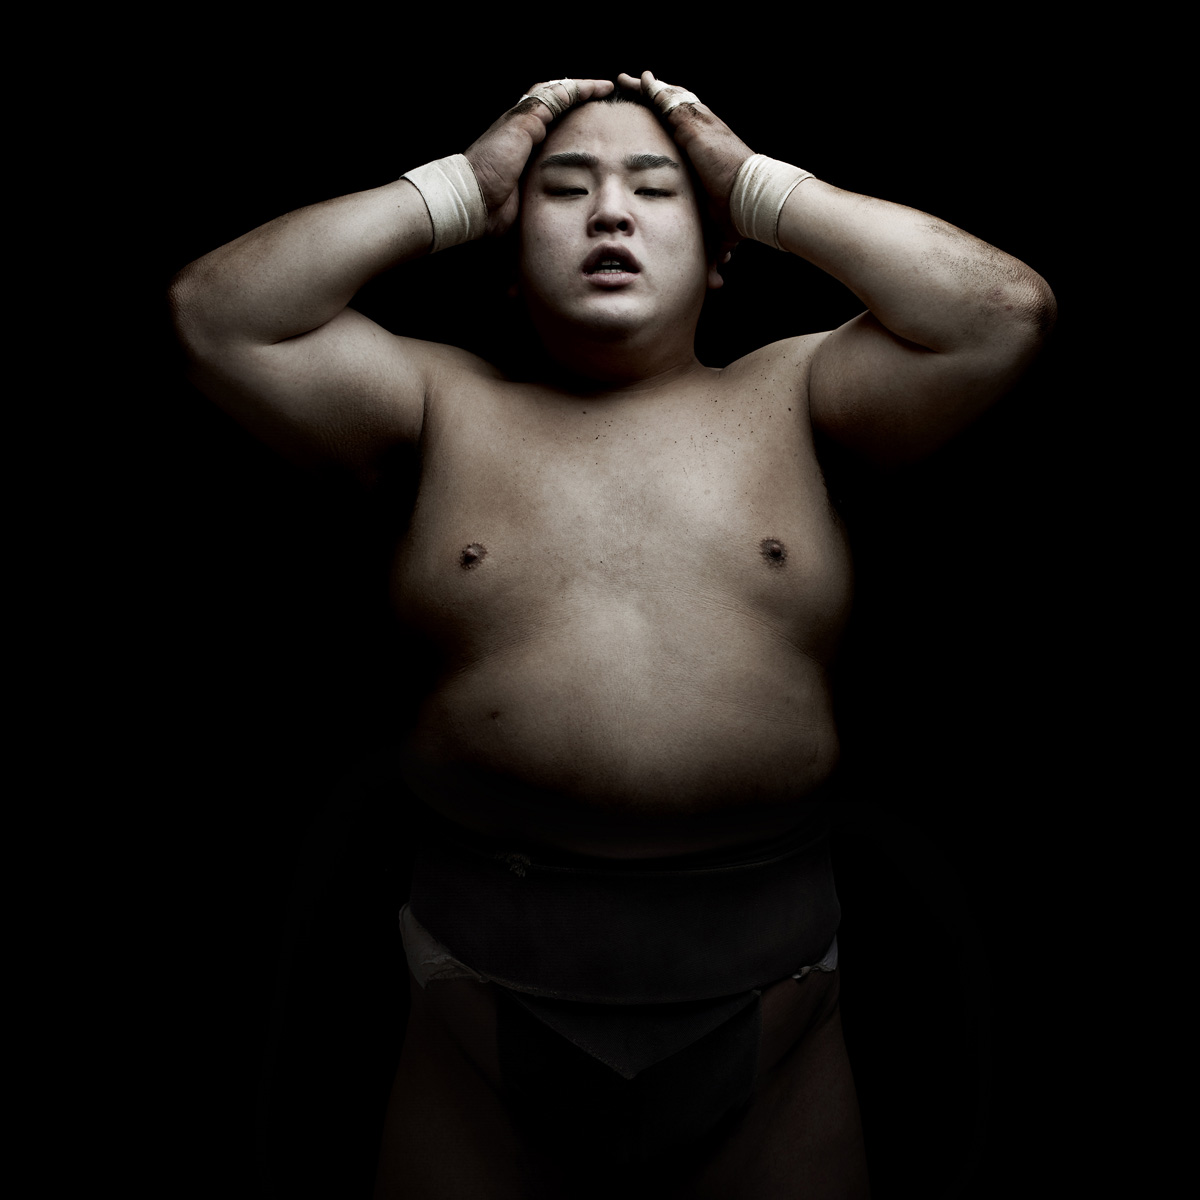 It's Not The Size Of This Sumo Wrestler That's Stunning